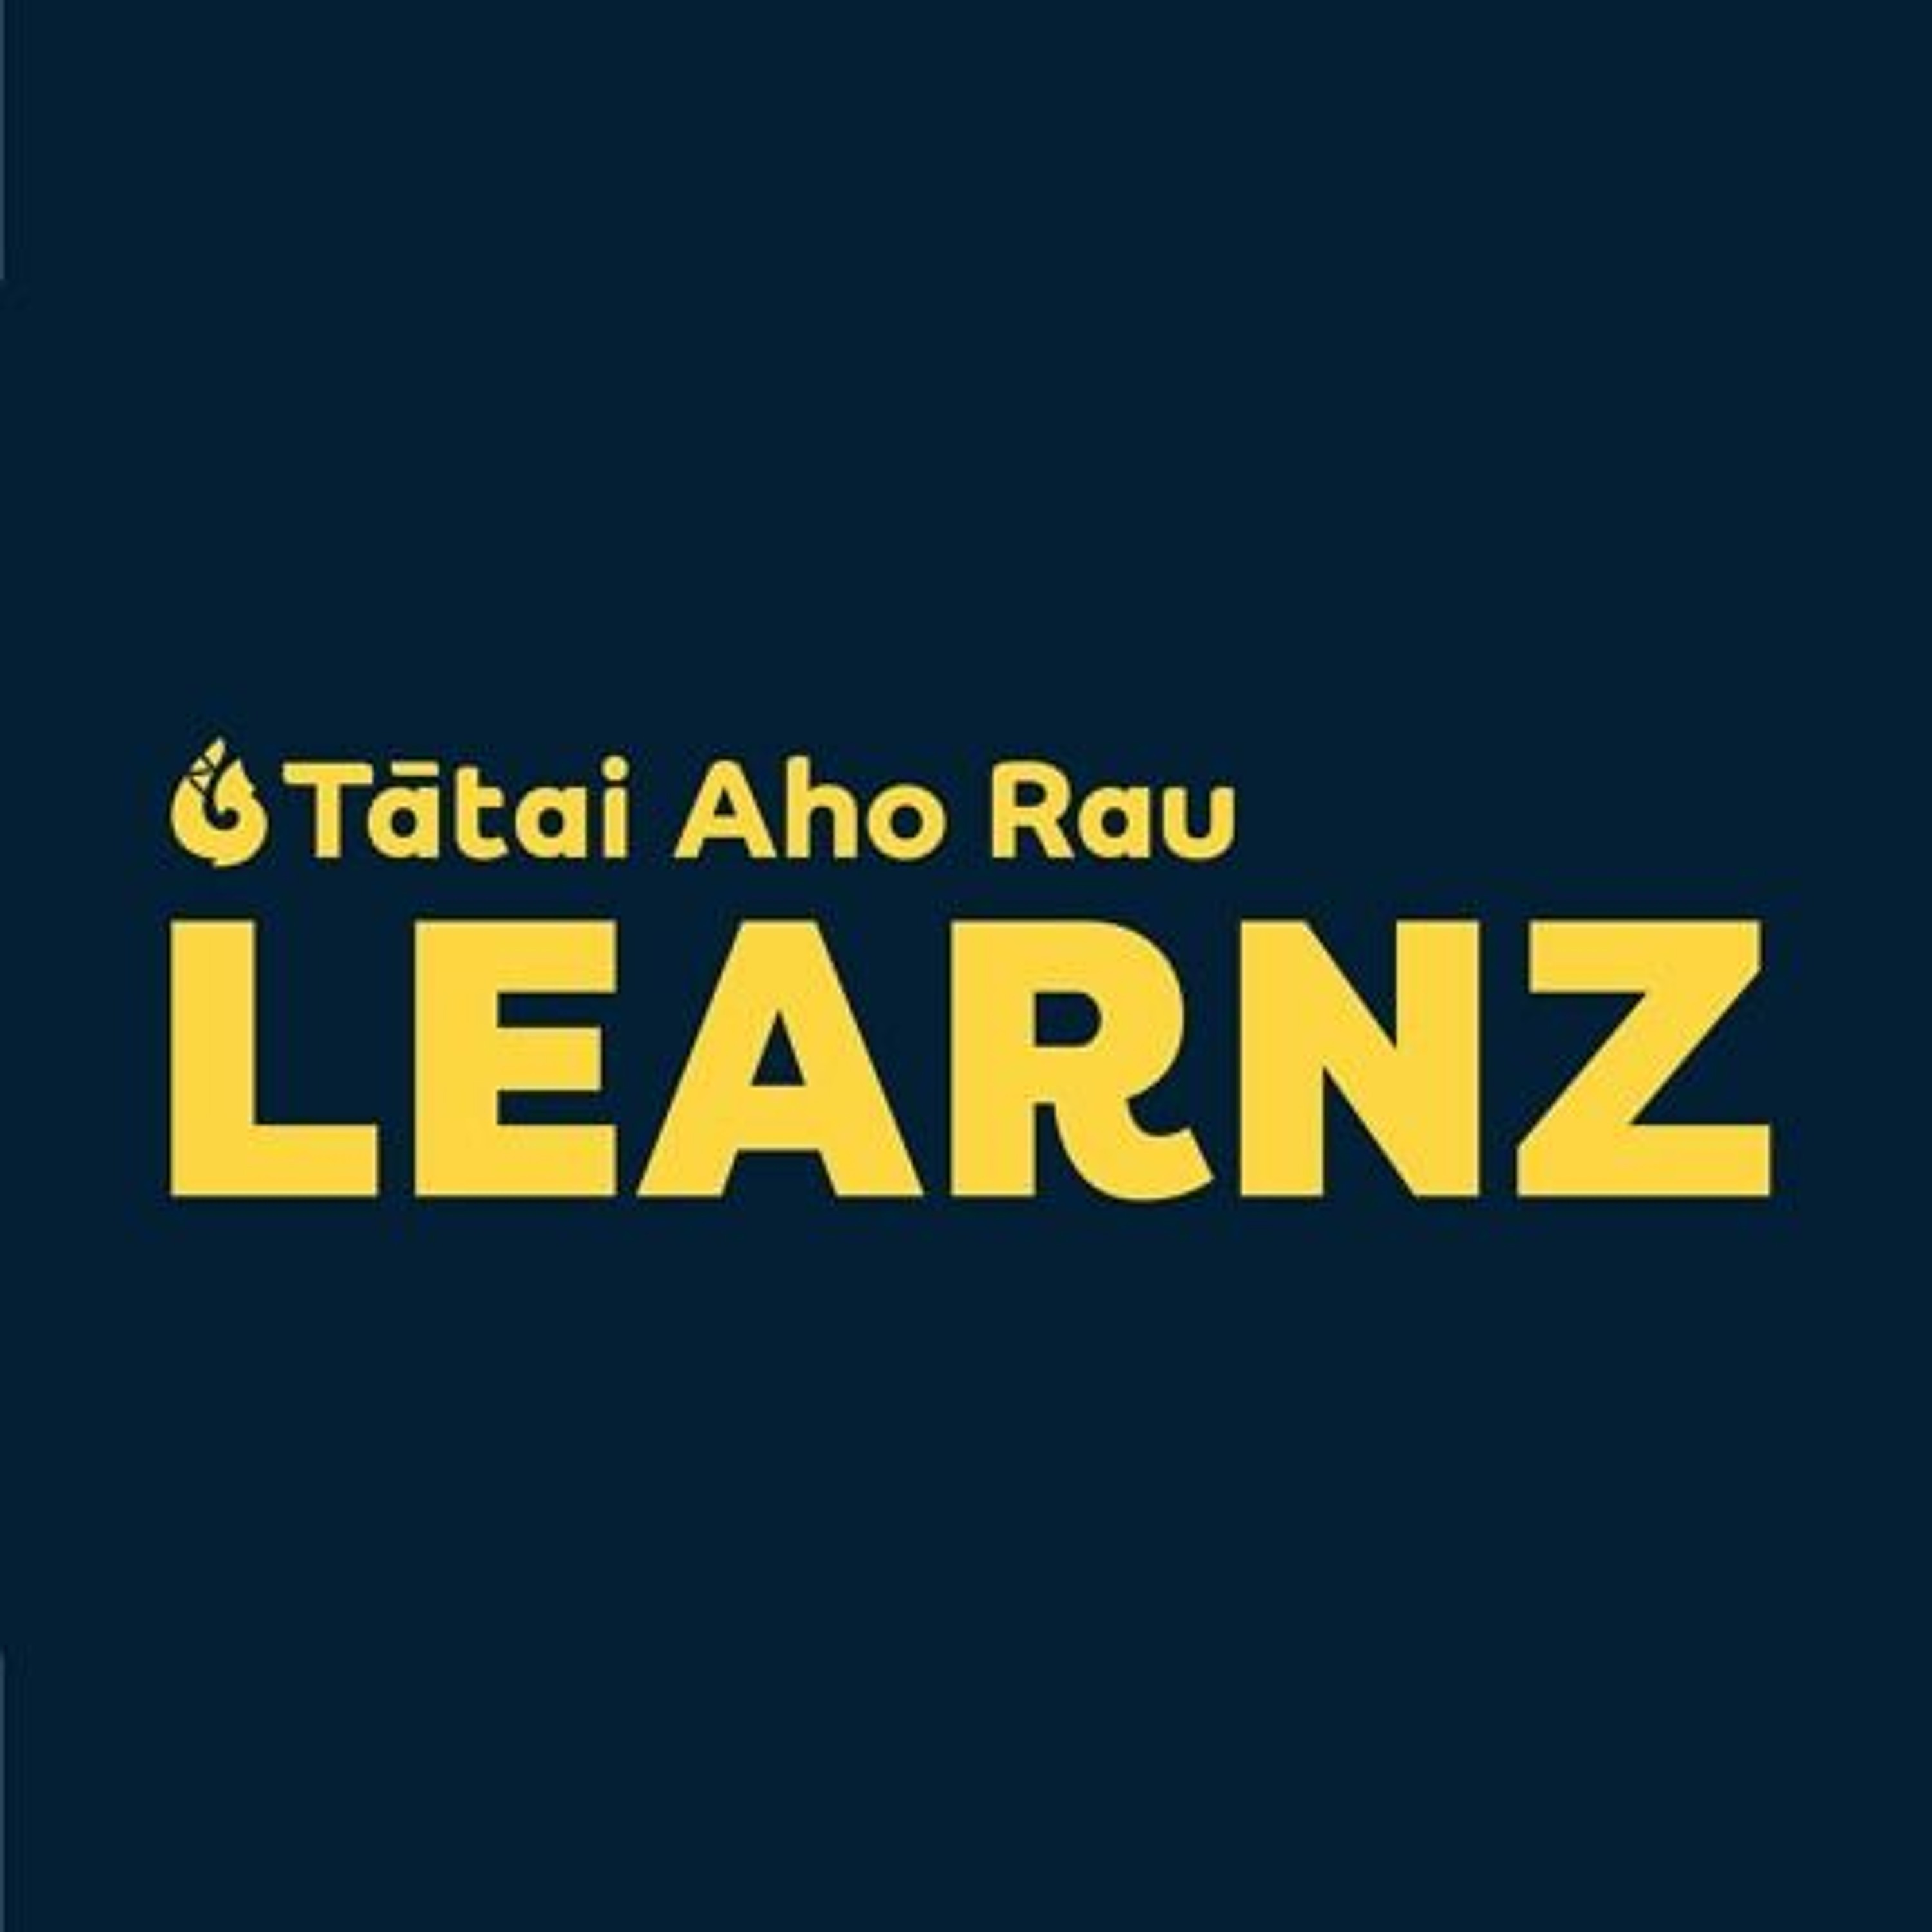 Learnz identity and heritage conservation in Aotearoa New Zealand